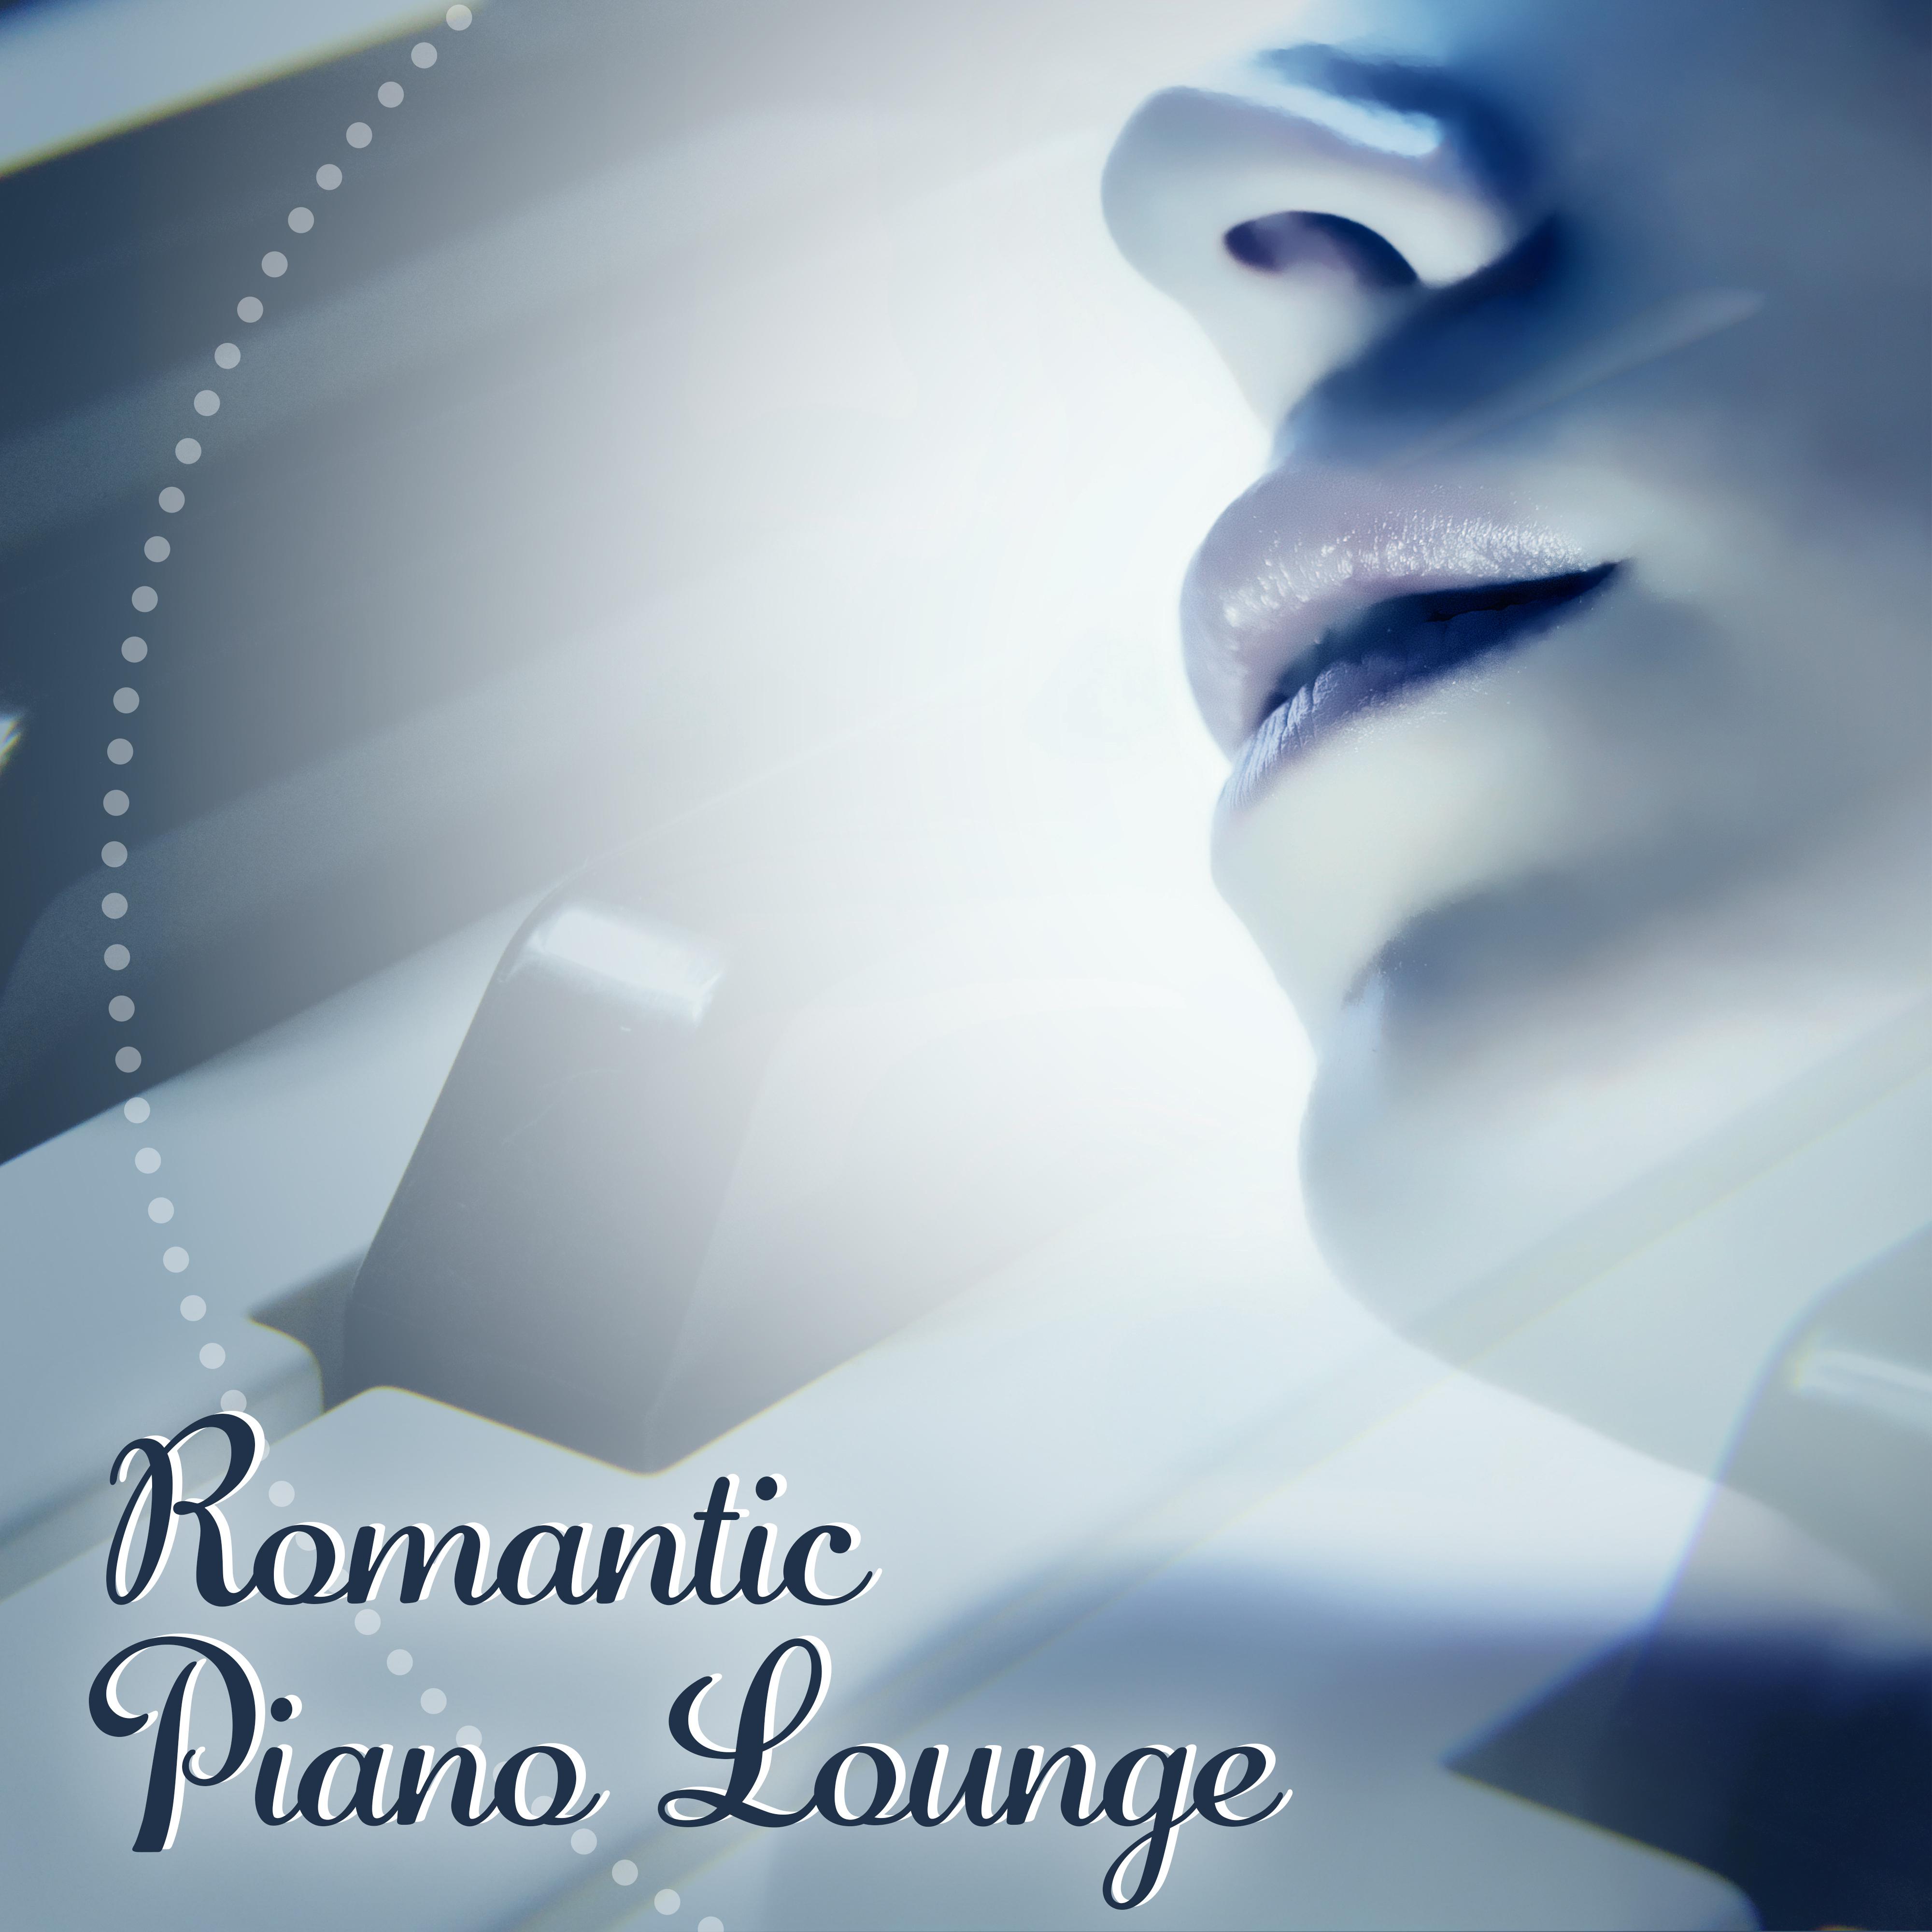 Romantic Piano Lounge  Sensual Music, Instrumental Sounds, Romantic Jazz for Dinner, Relaxed Jazz